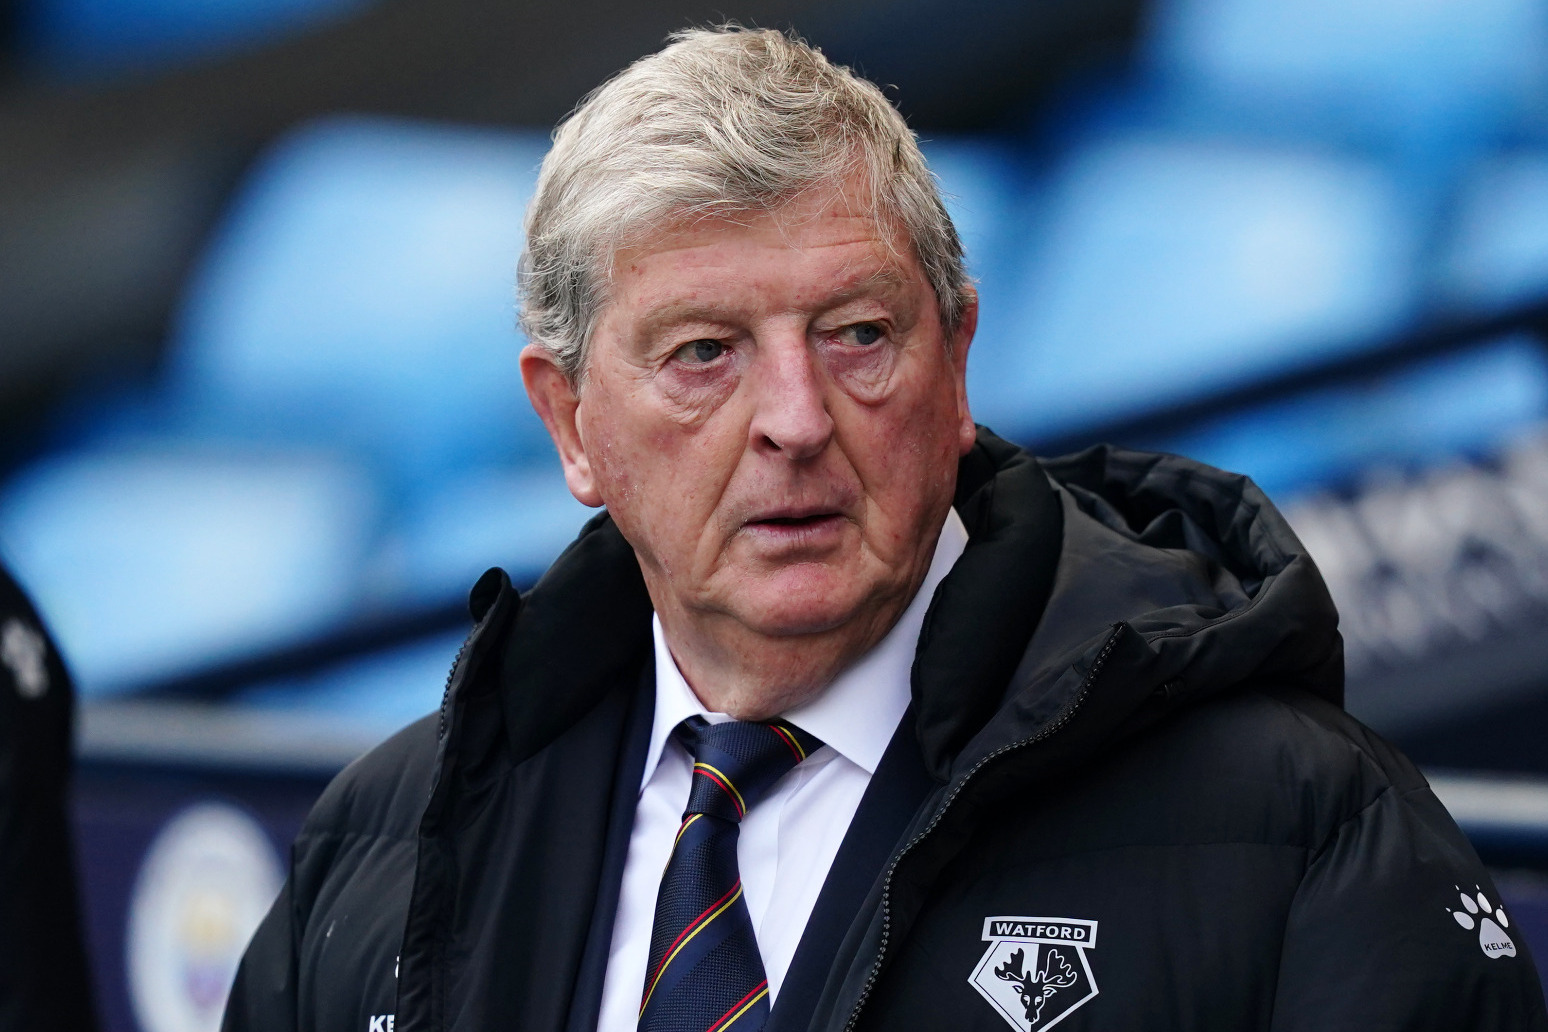 Roy Hodgson CBE says his days in management will be over when Watford’s season ends 